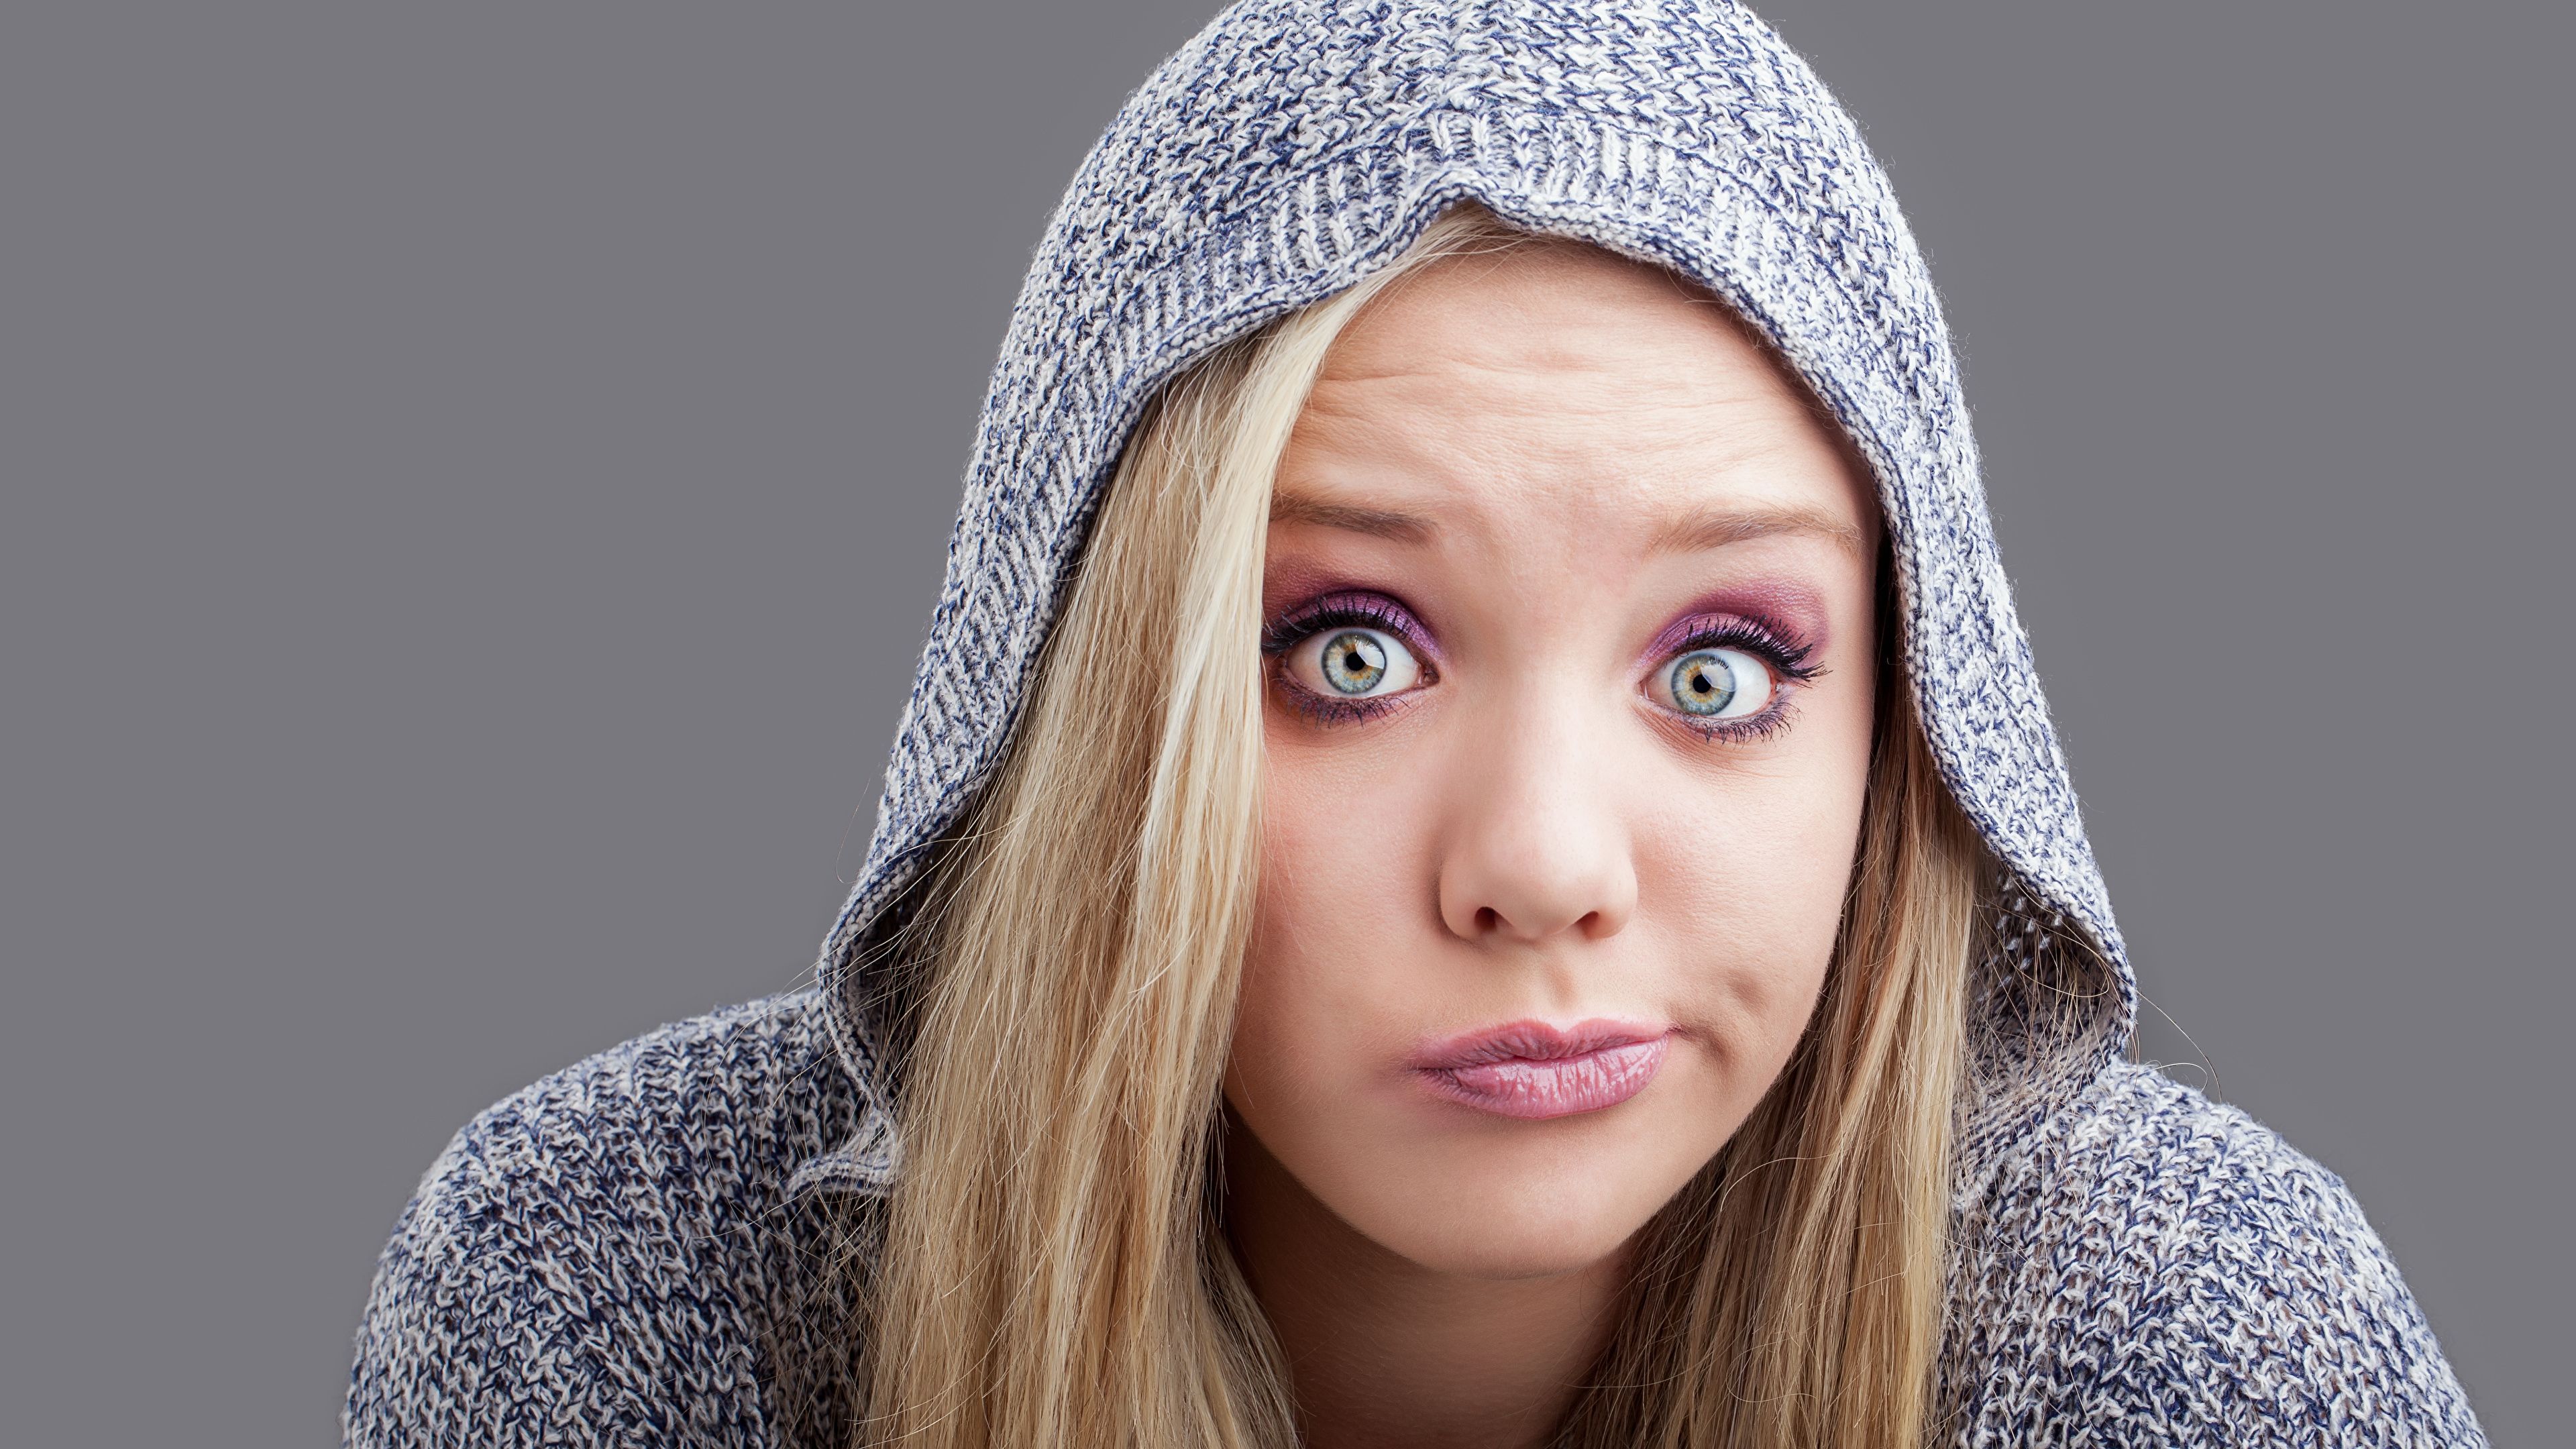 Image surprised Funny Face Girls hooded Glance 3840x2160